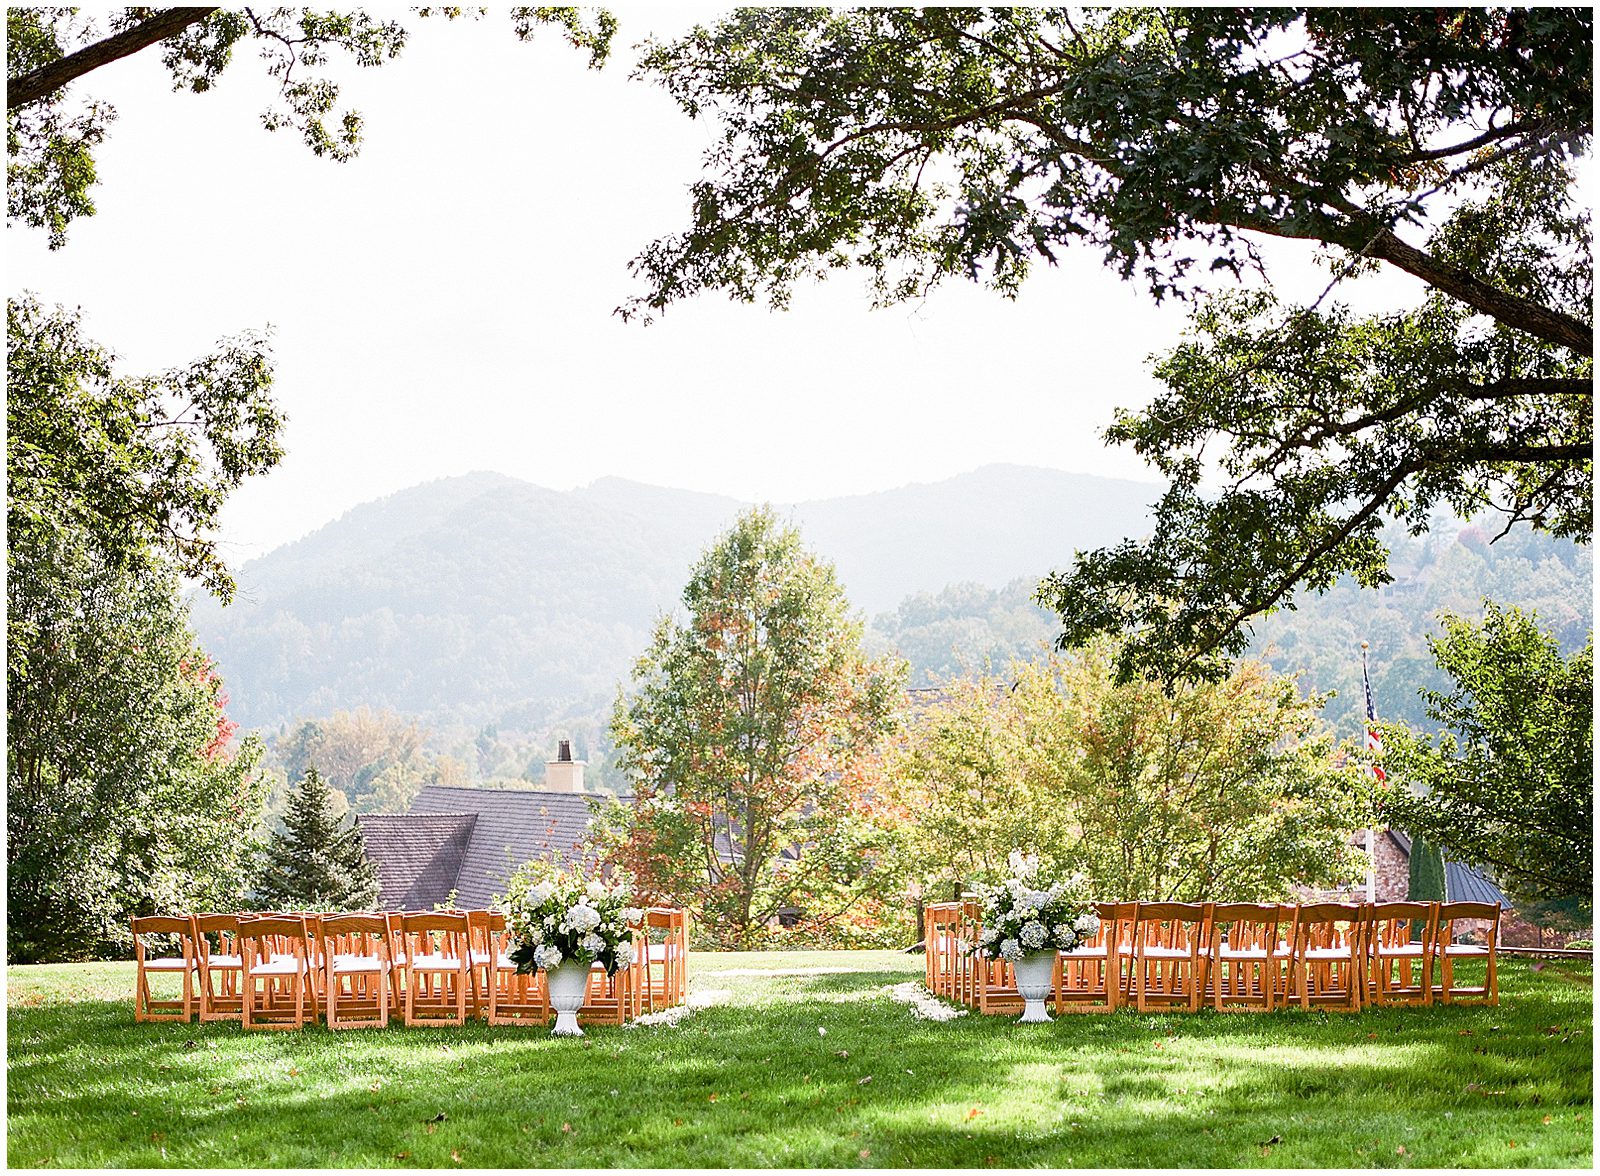 The Cliffs at Walnut Cove Outdoor Asheville Wedding Ceremony Site Photo